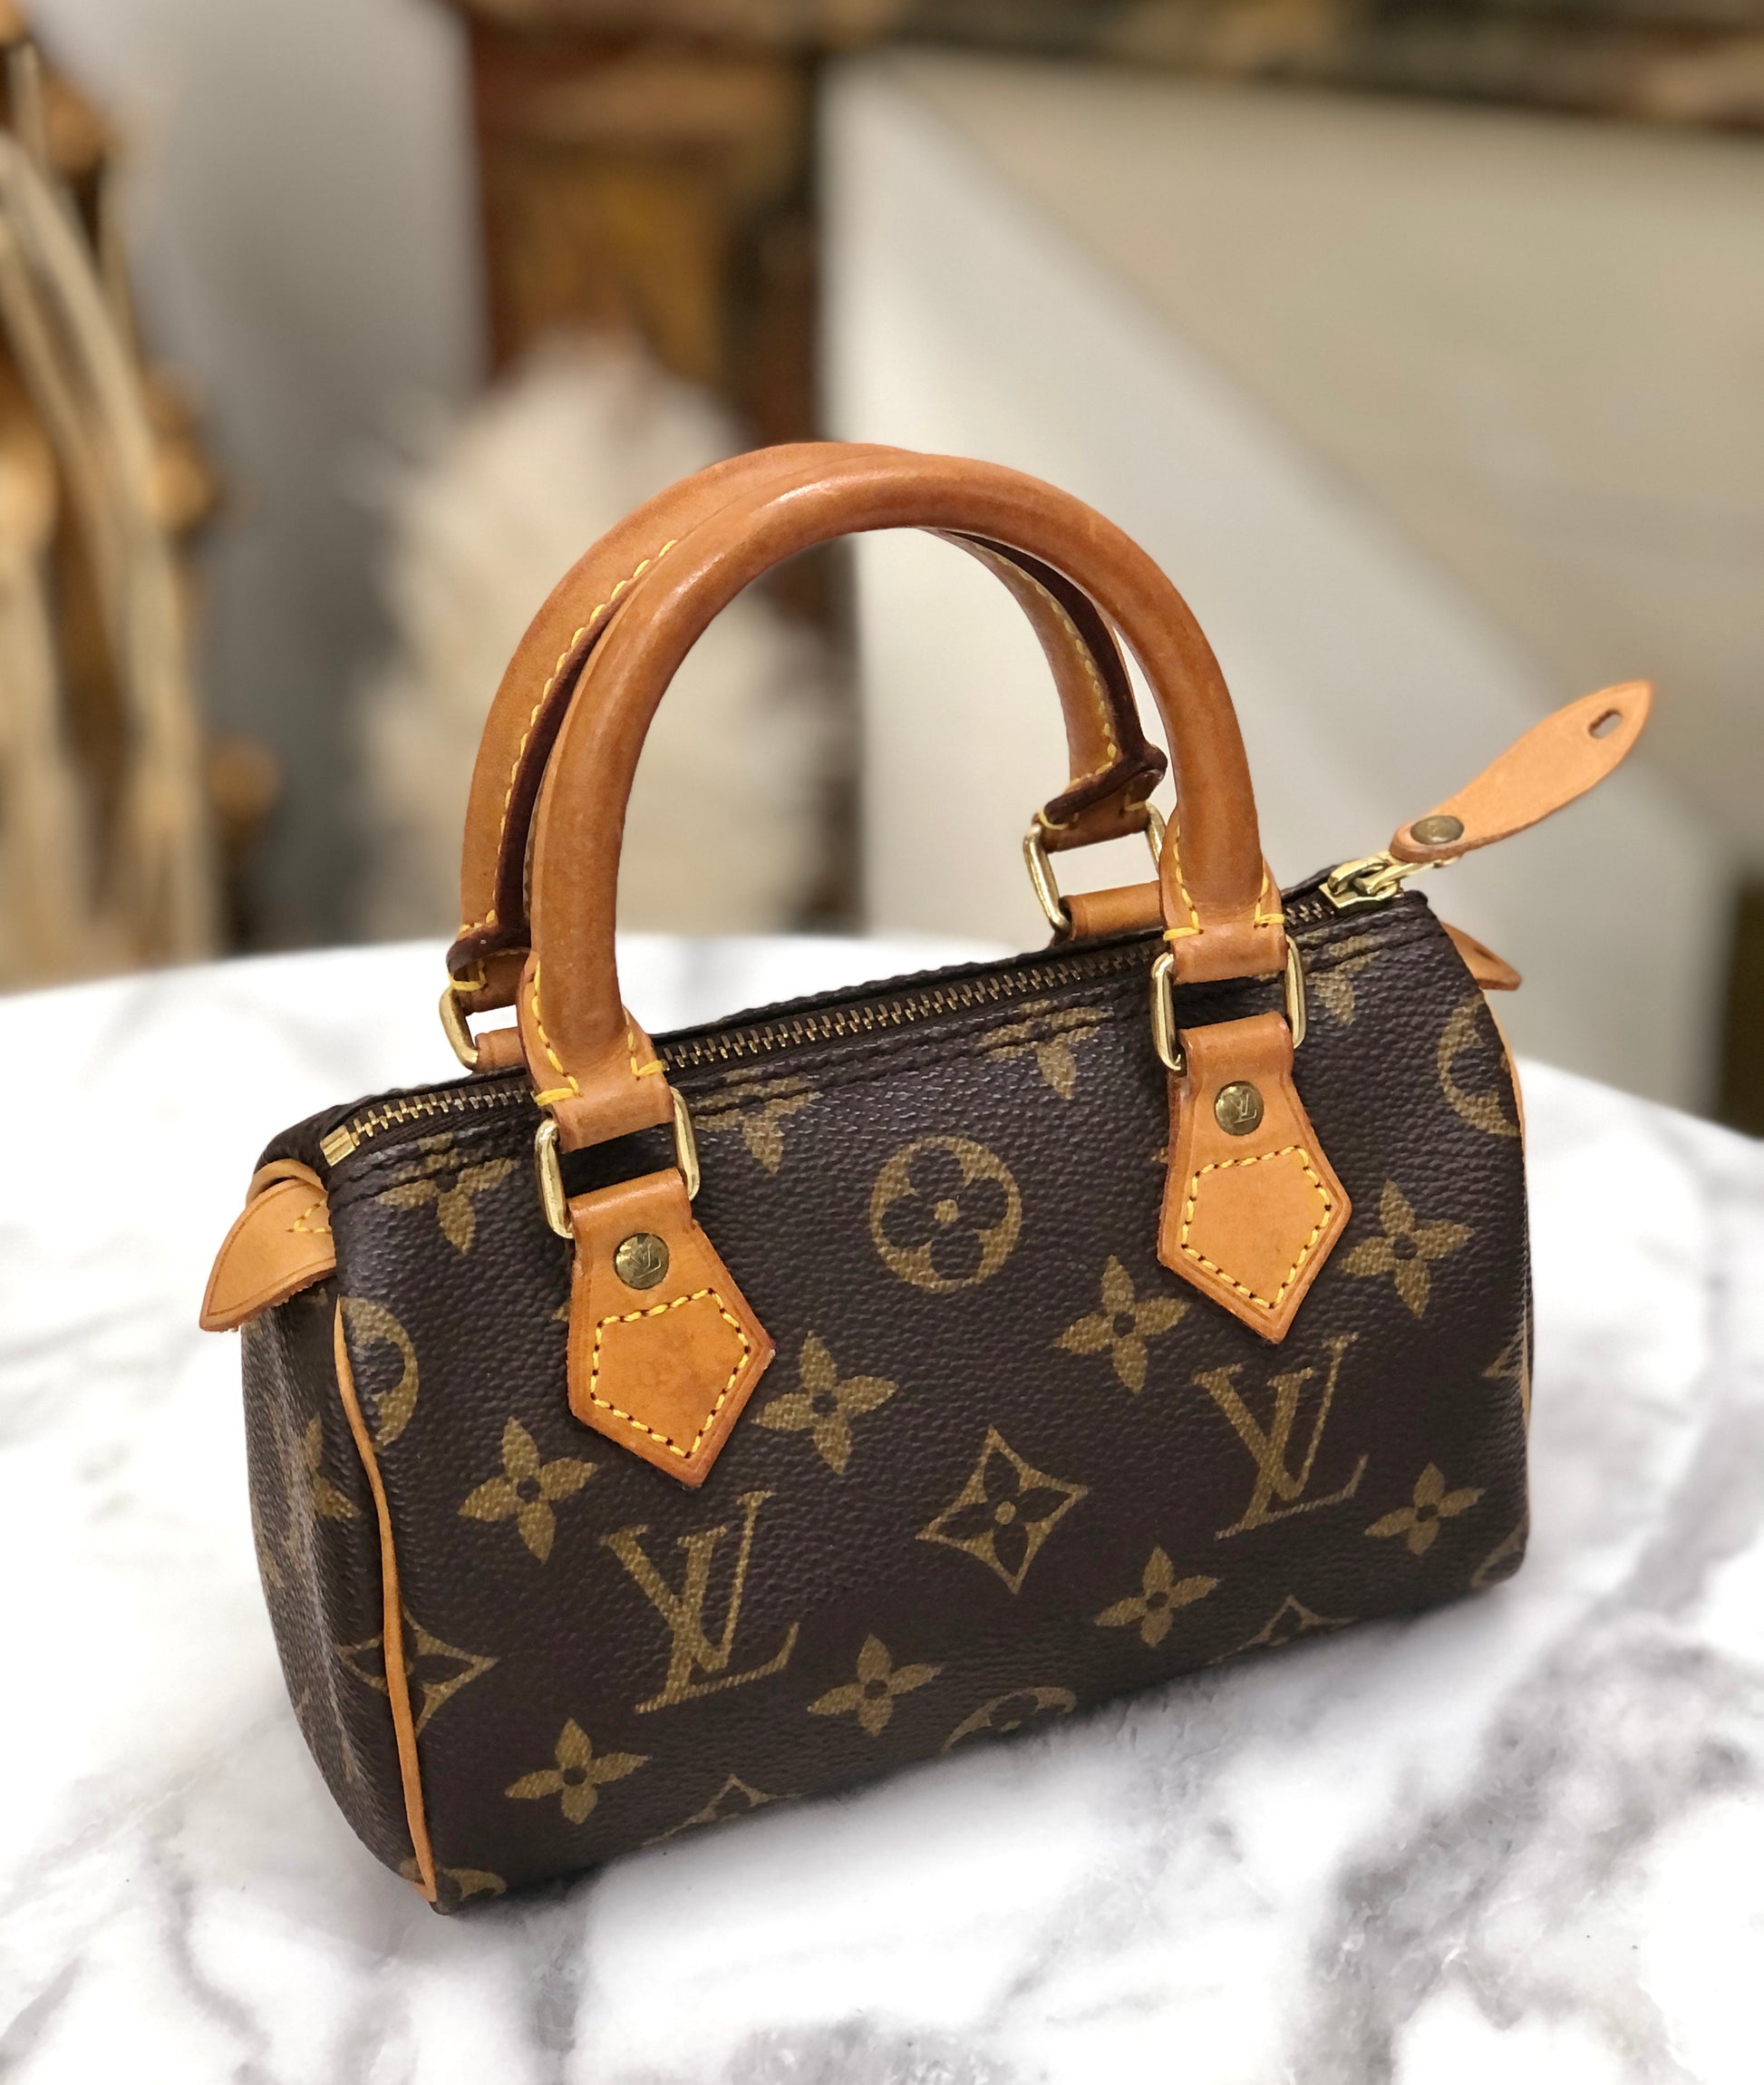 Louis Vuitton vintage small handbag with leather strap